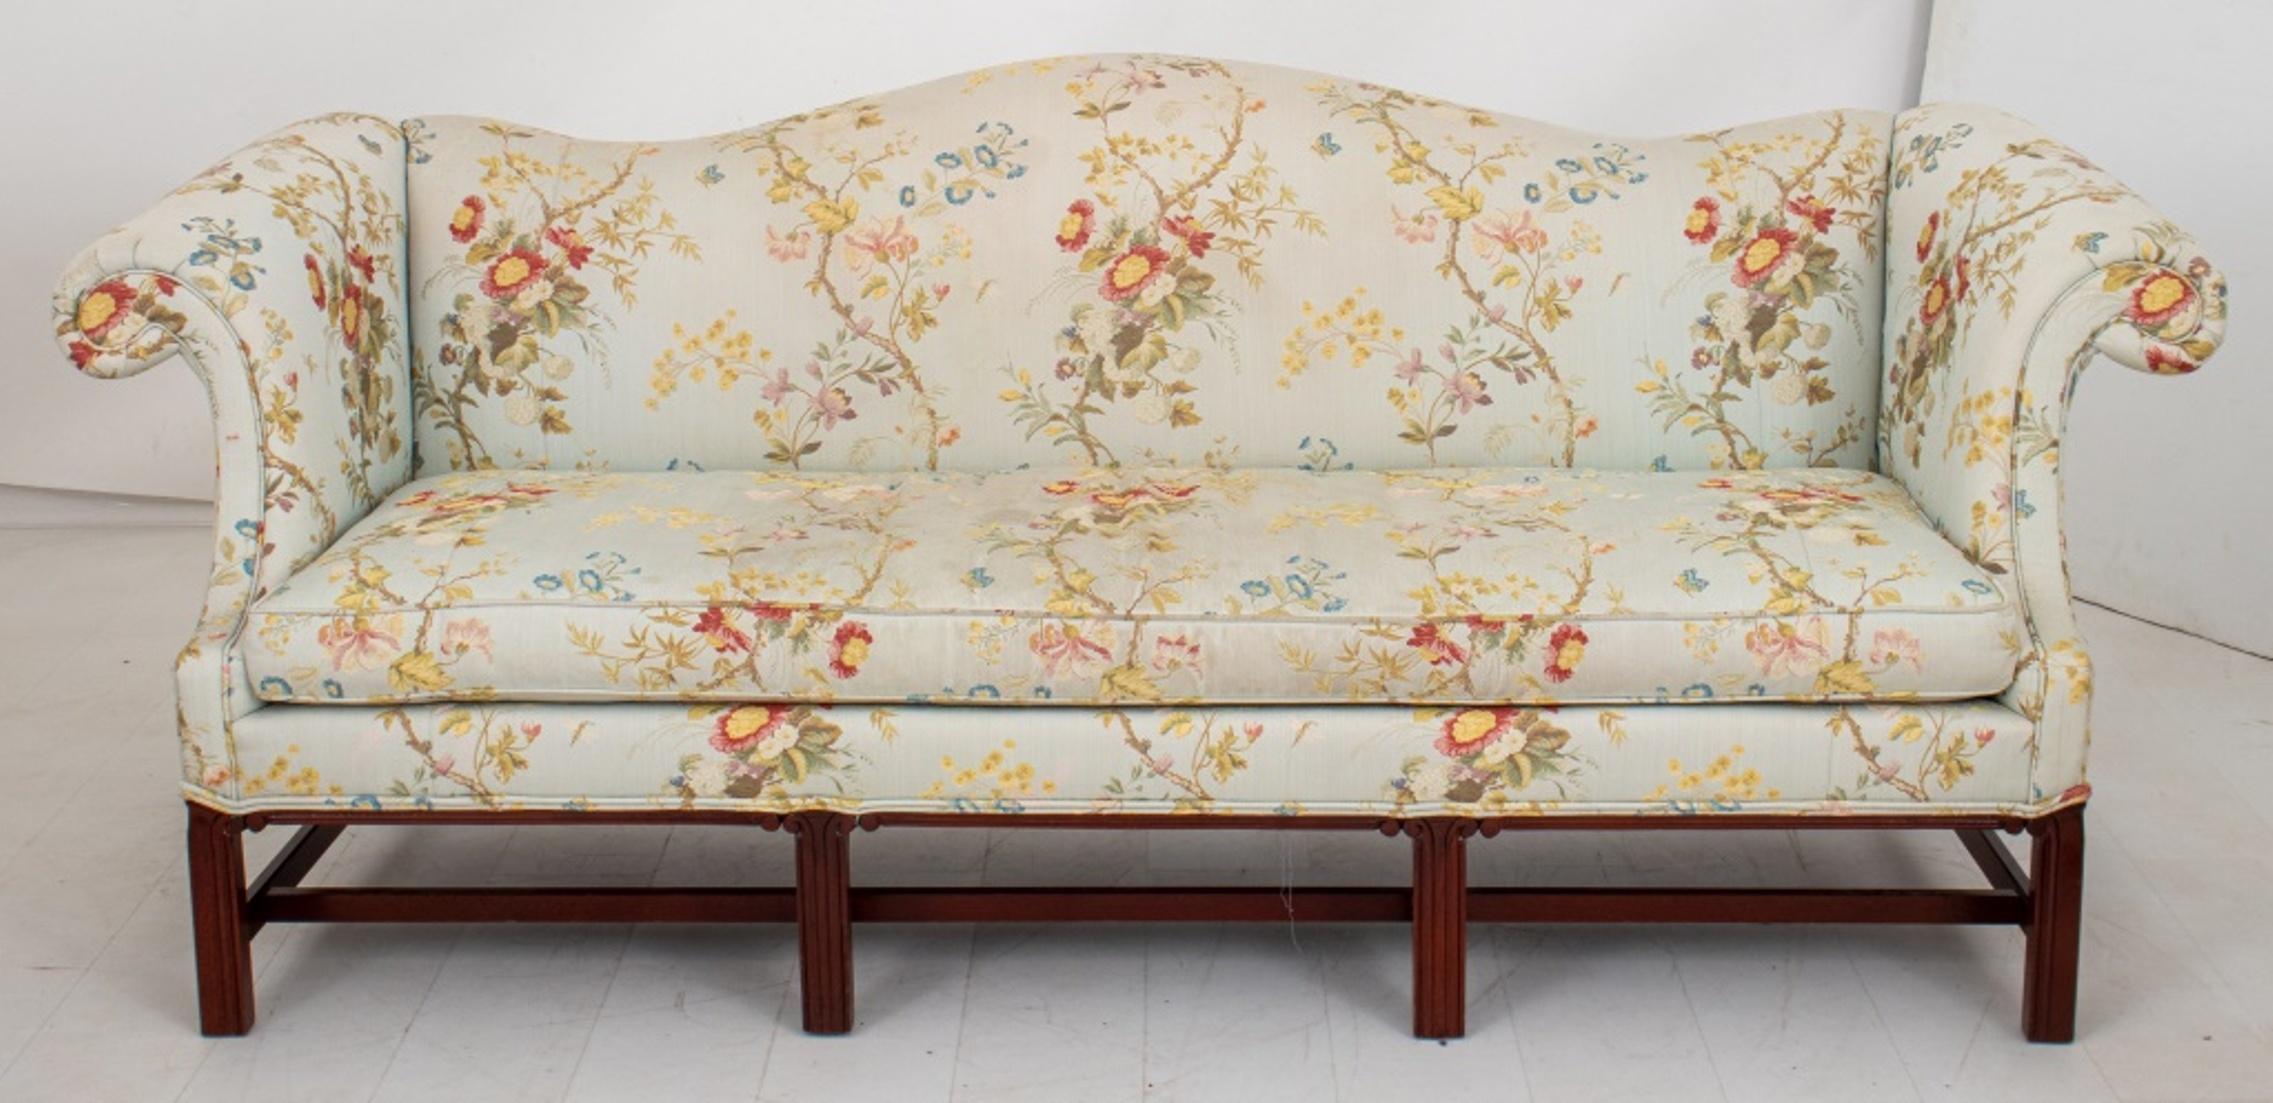 George III style camelback sofa upholstered allover in multicolored silk lampas, with arched back and scrolling arms above a drop in seat, on bracket legs conjoined by stretchers. 

Dimensions: 34